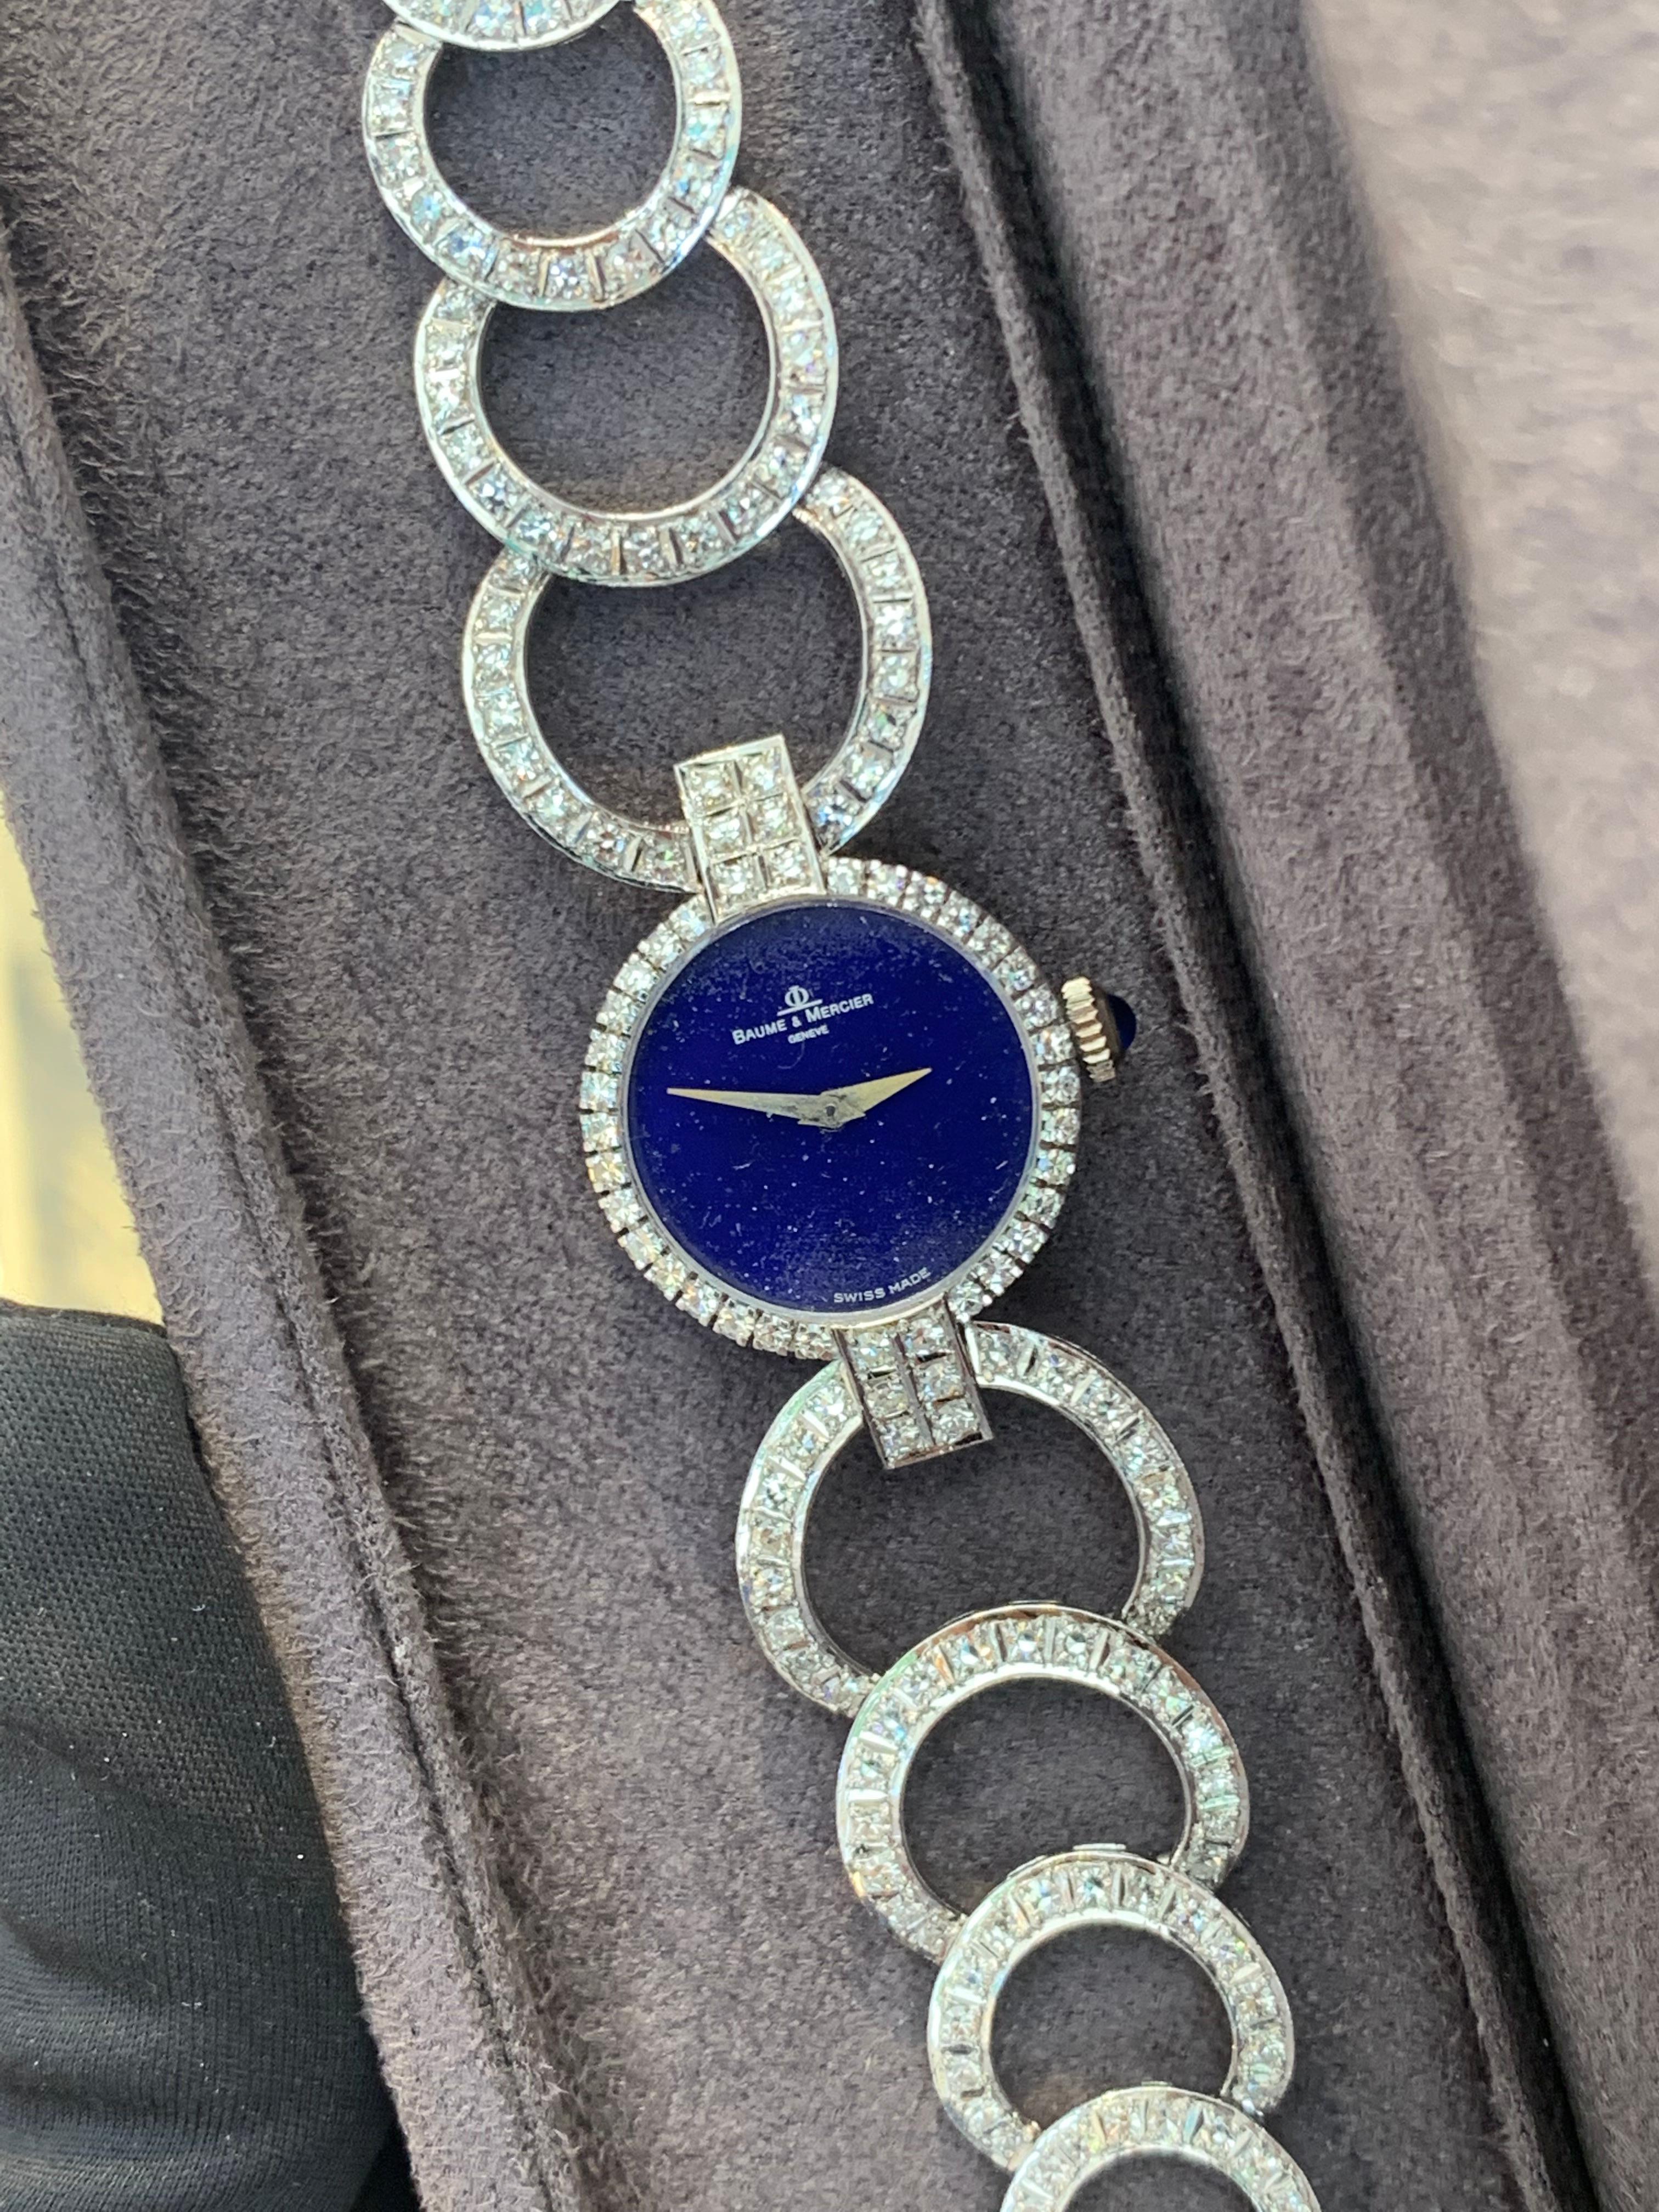 Baumé & Mercier, Swiss Made, In 18k White Gold, Factory Set With Diamonds.
Amazing Shine, Incredible Craftsmanship, Unbelievable Work Of Art.
Beautiful Lapis Lazuli Dial.
Extremely Rare Time Piece.
Great Statement Piece.
Approximately 10.0 Carats Of